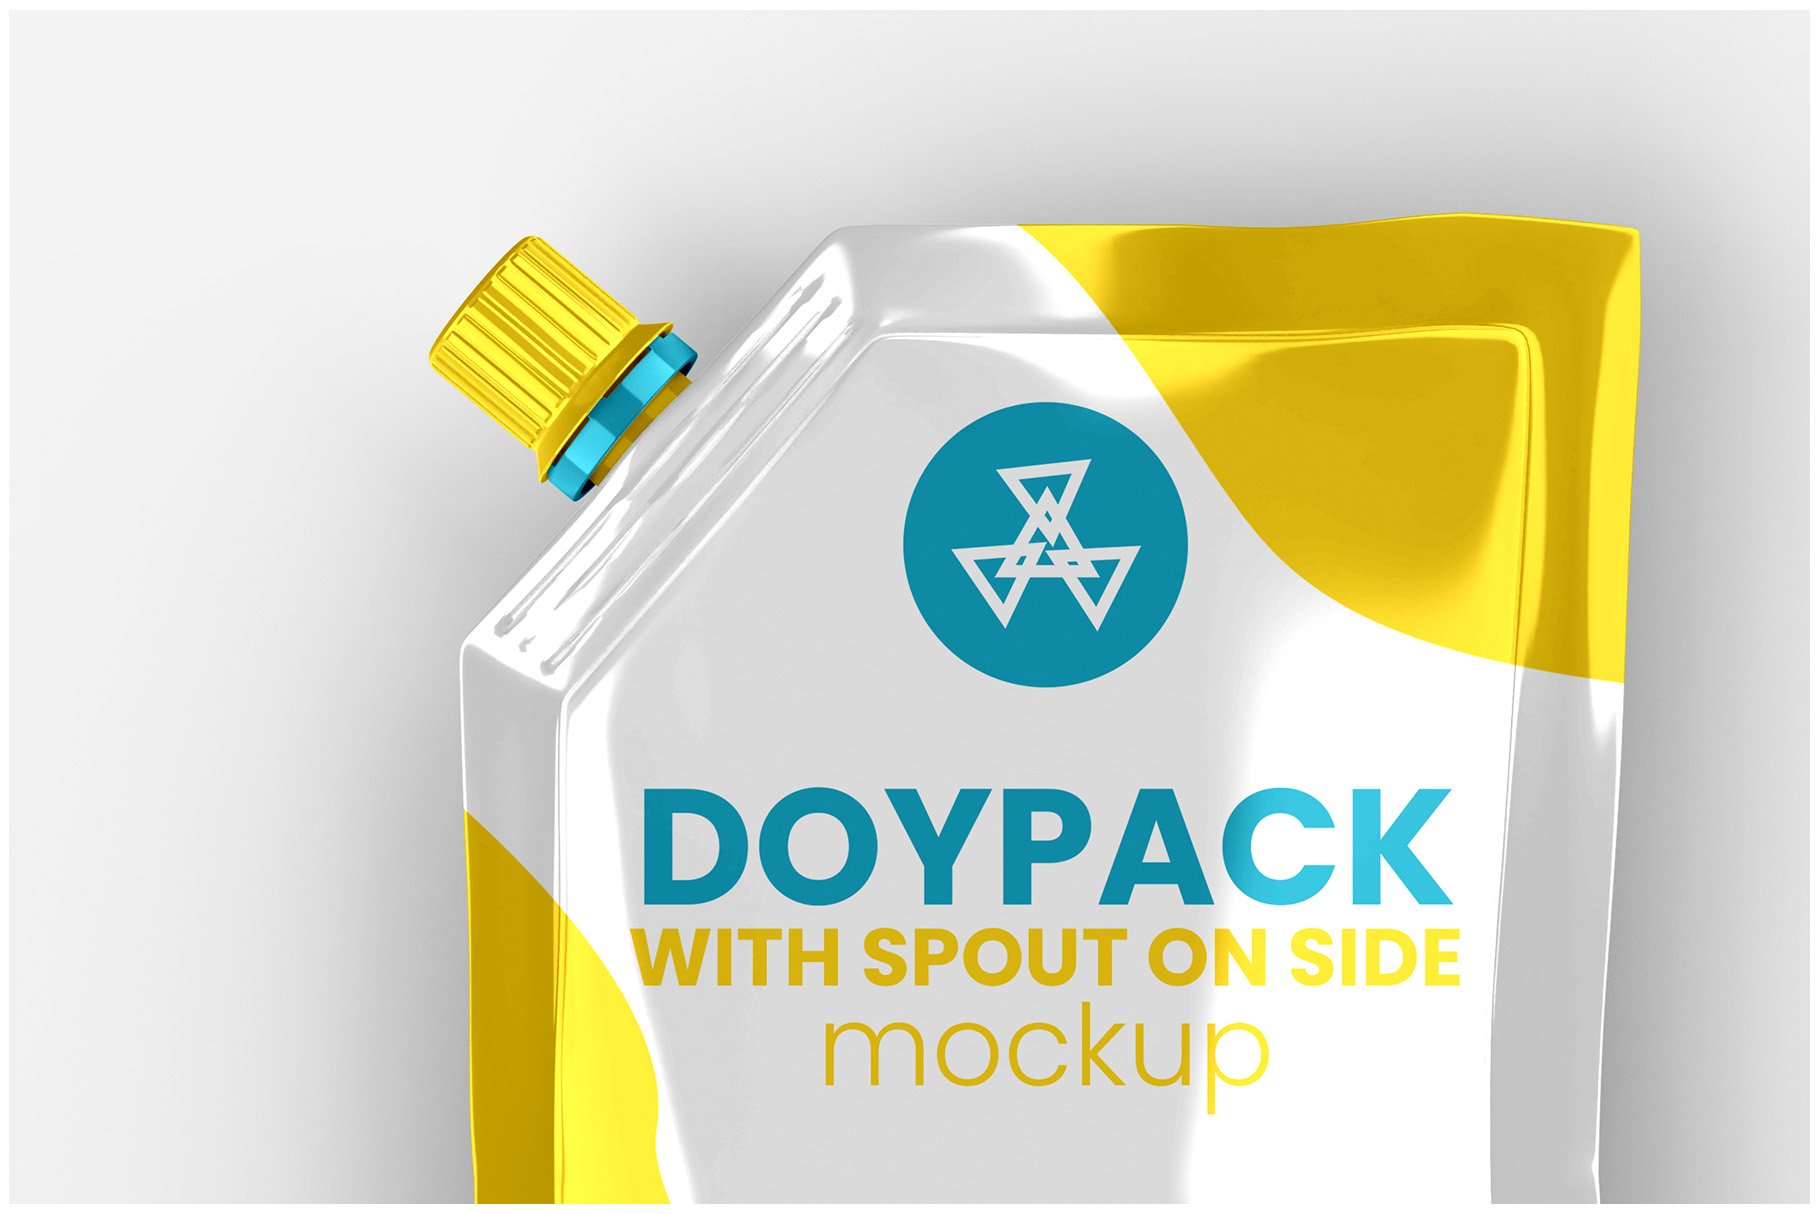 Doypack Pouch With Spout On Side Mockup - 12 Views - Design Cuts